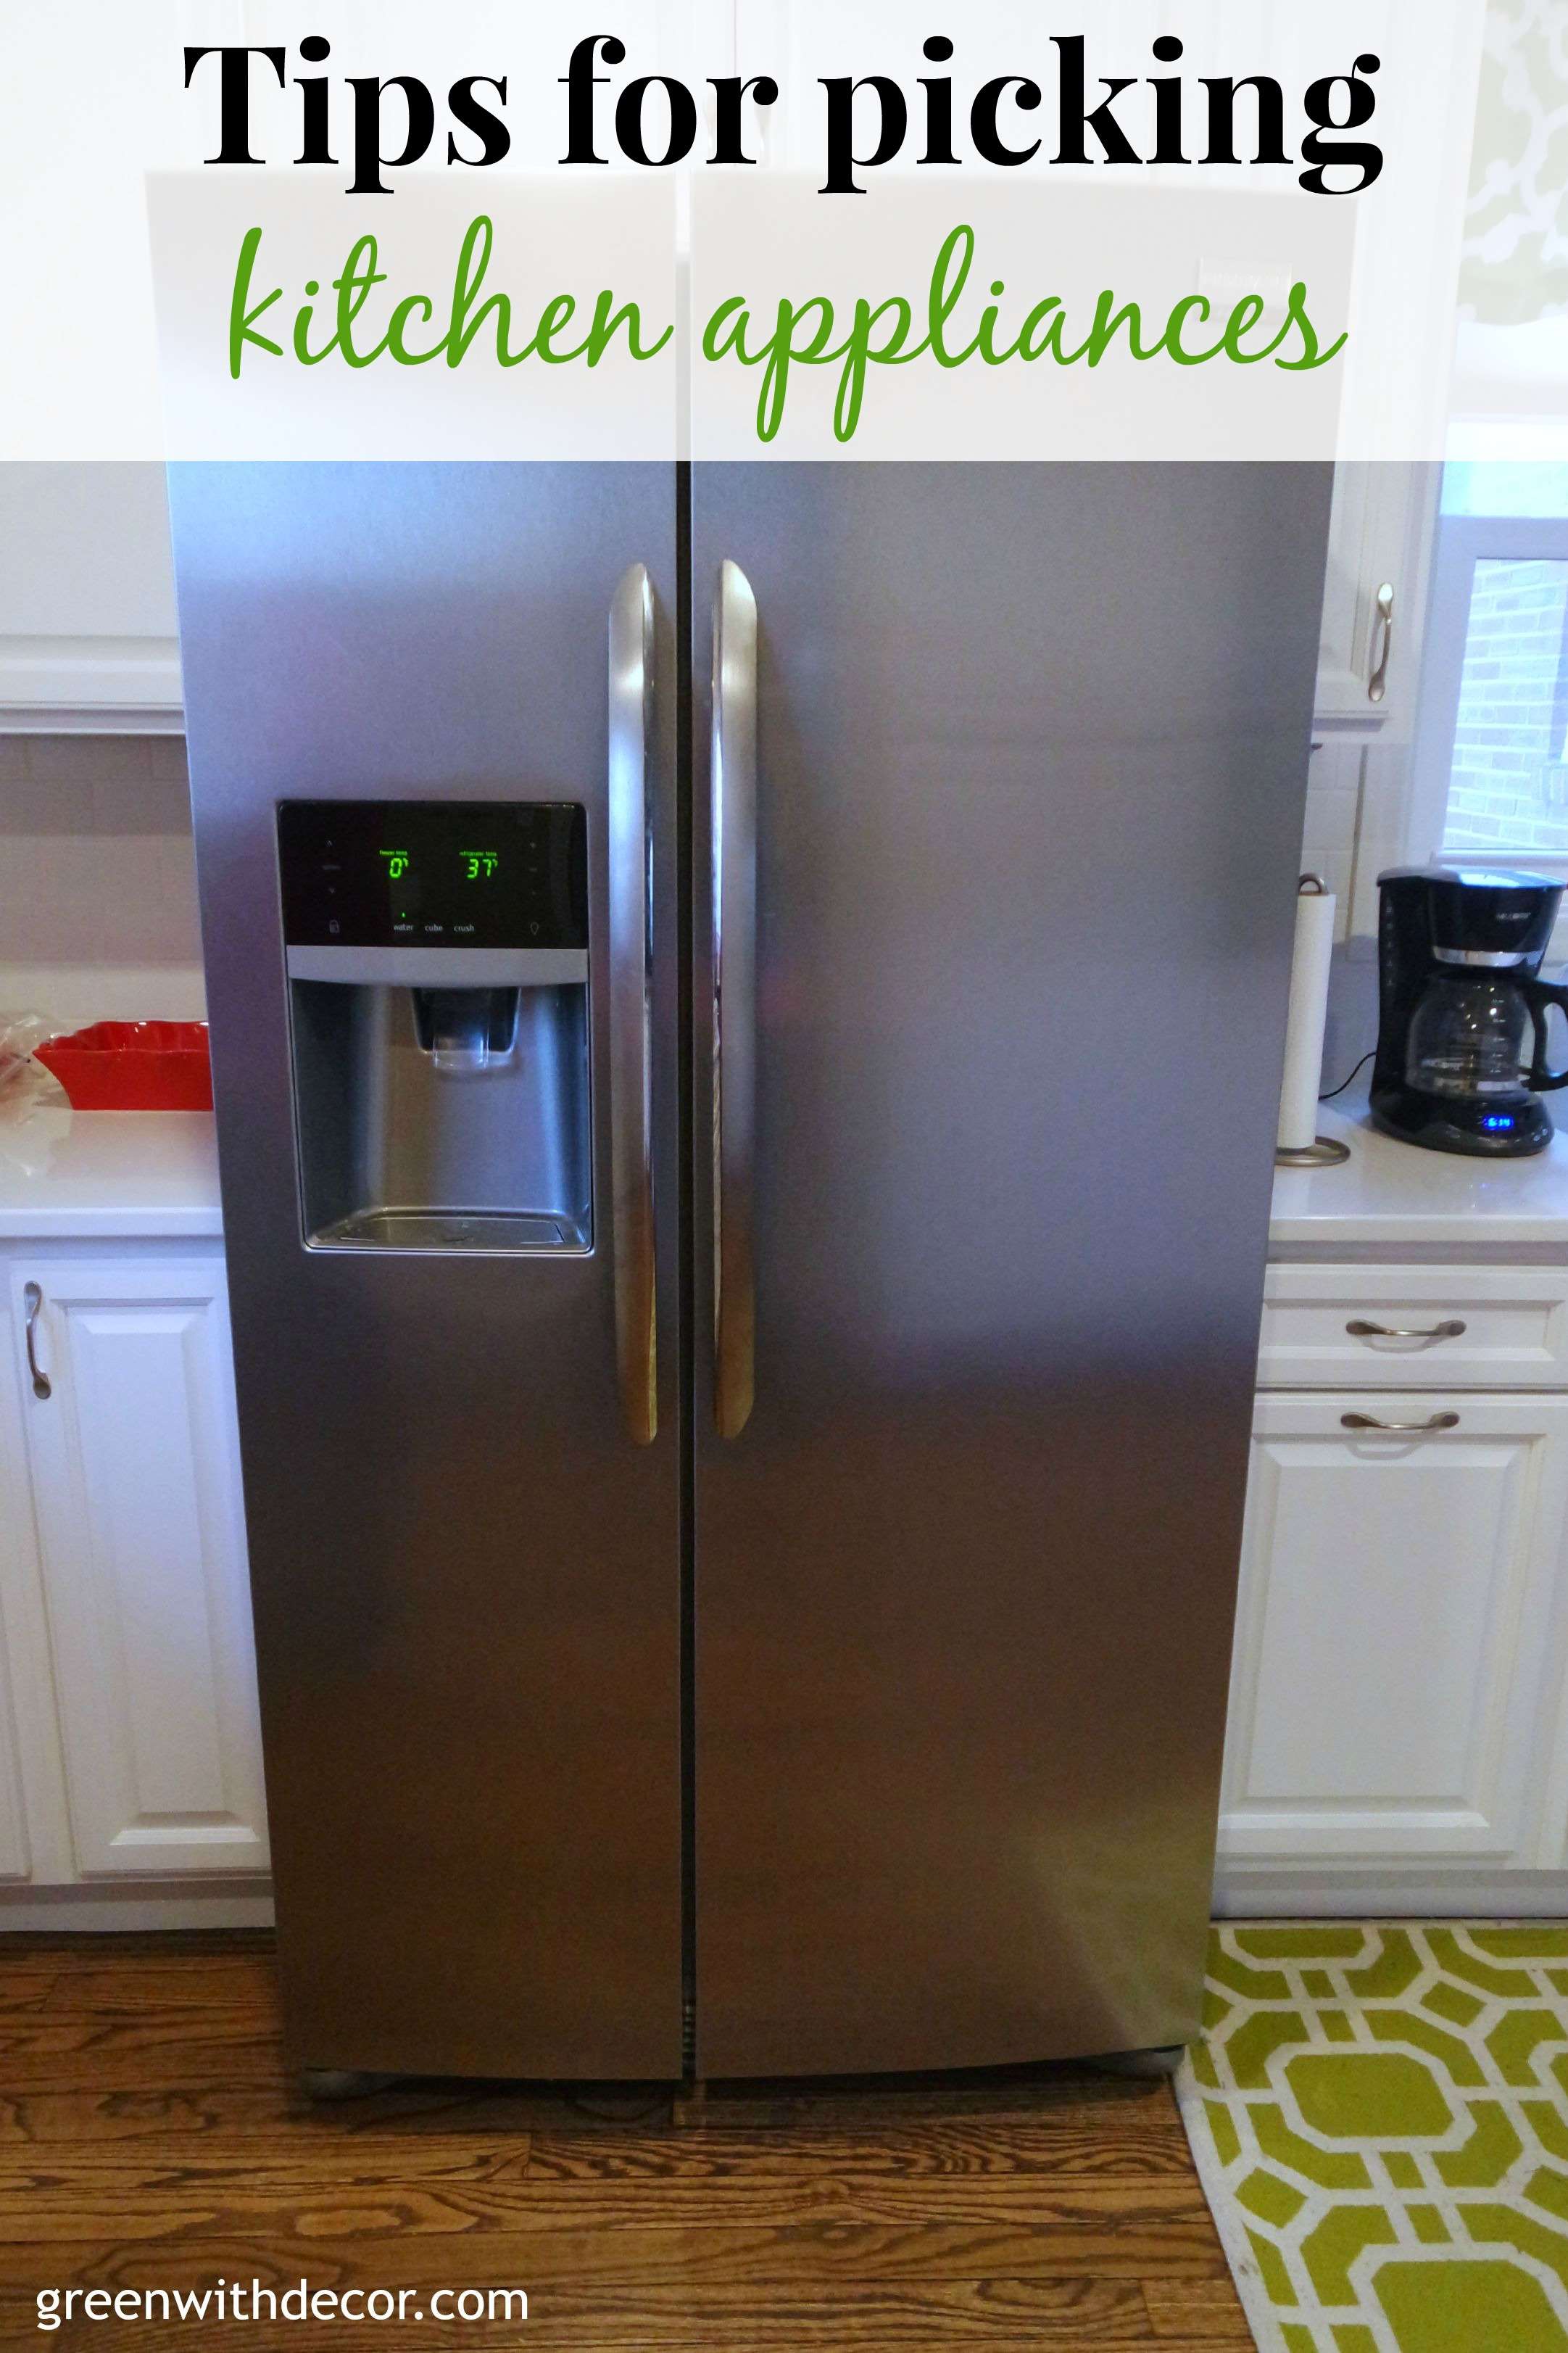 Tips for picking kitchen appliances. There are some great ideas here that I hadn’t thought of! So helpful when going through a kitchen renovation! | Green With Decor